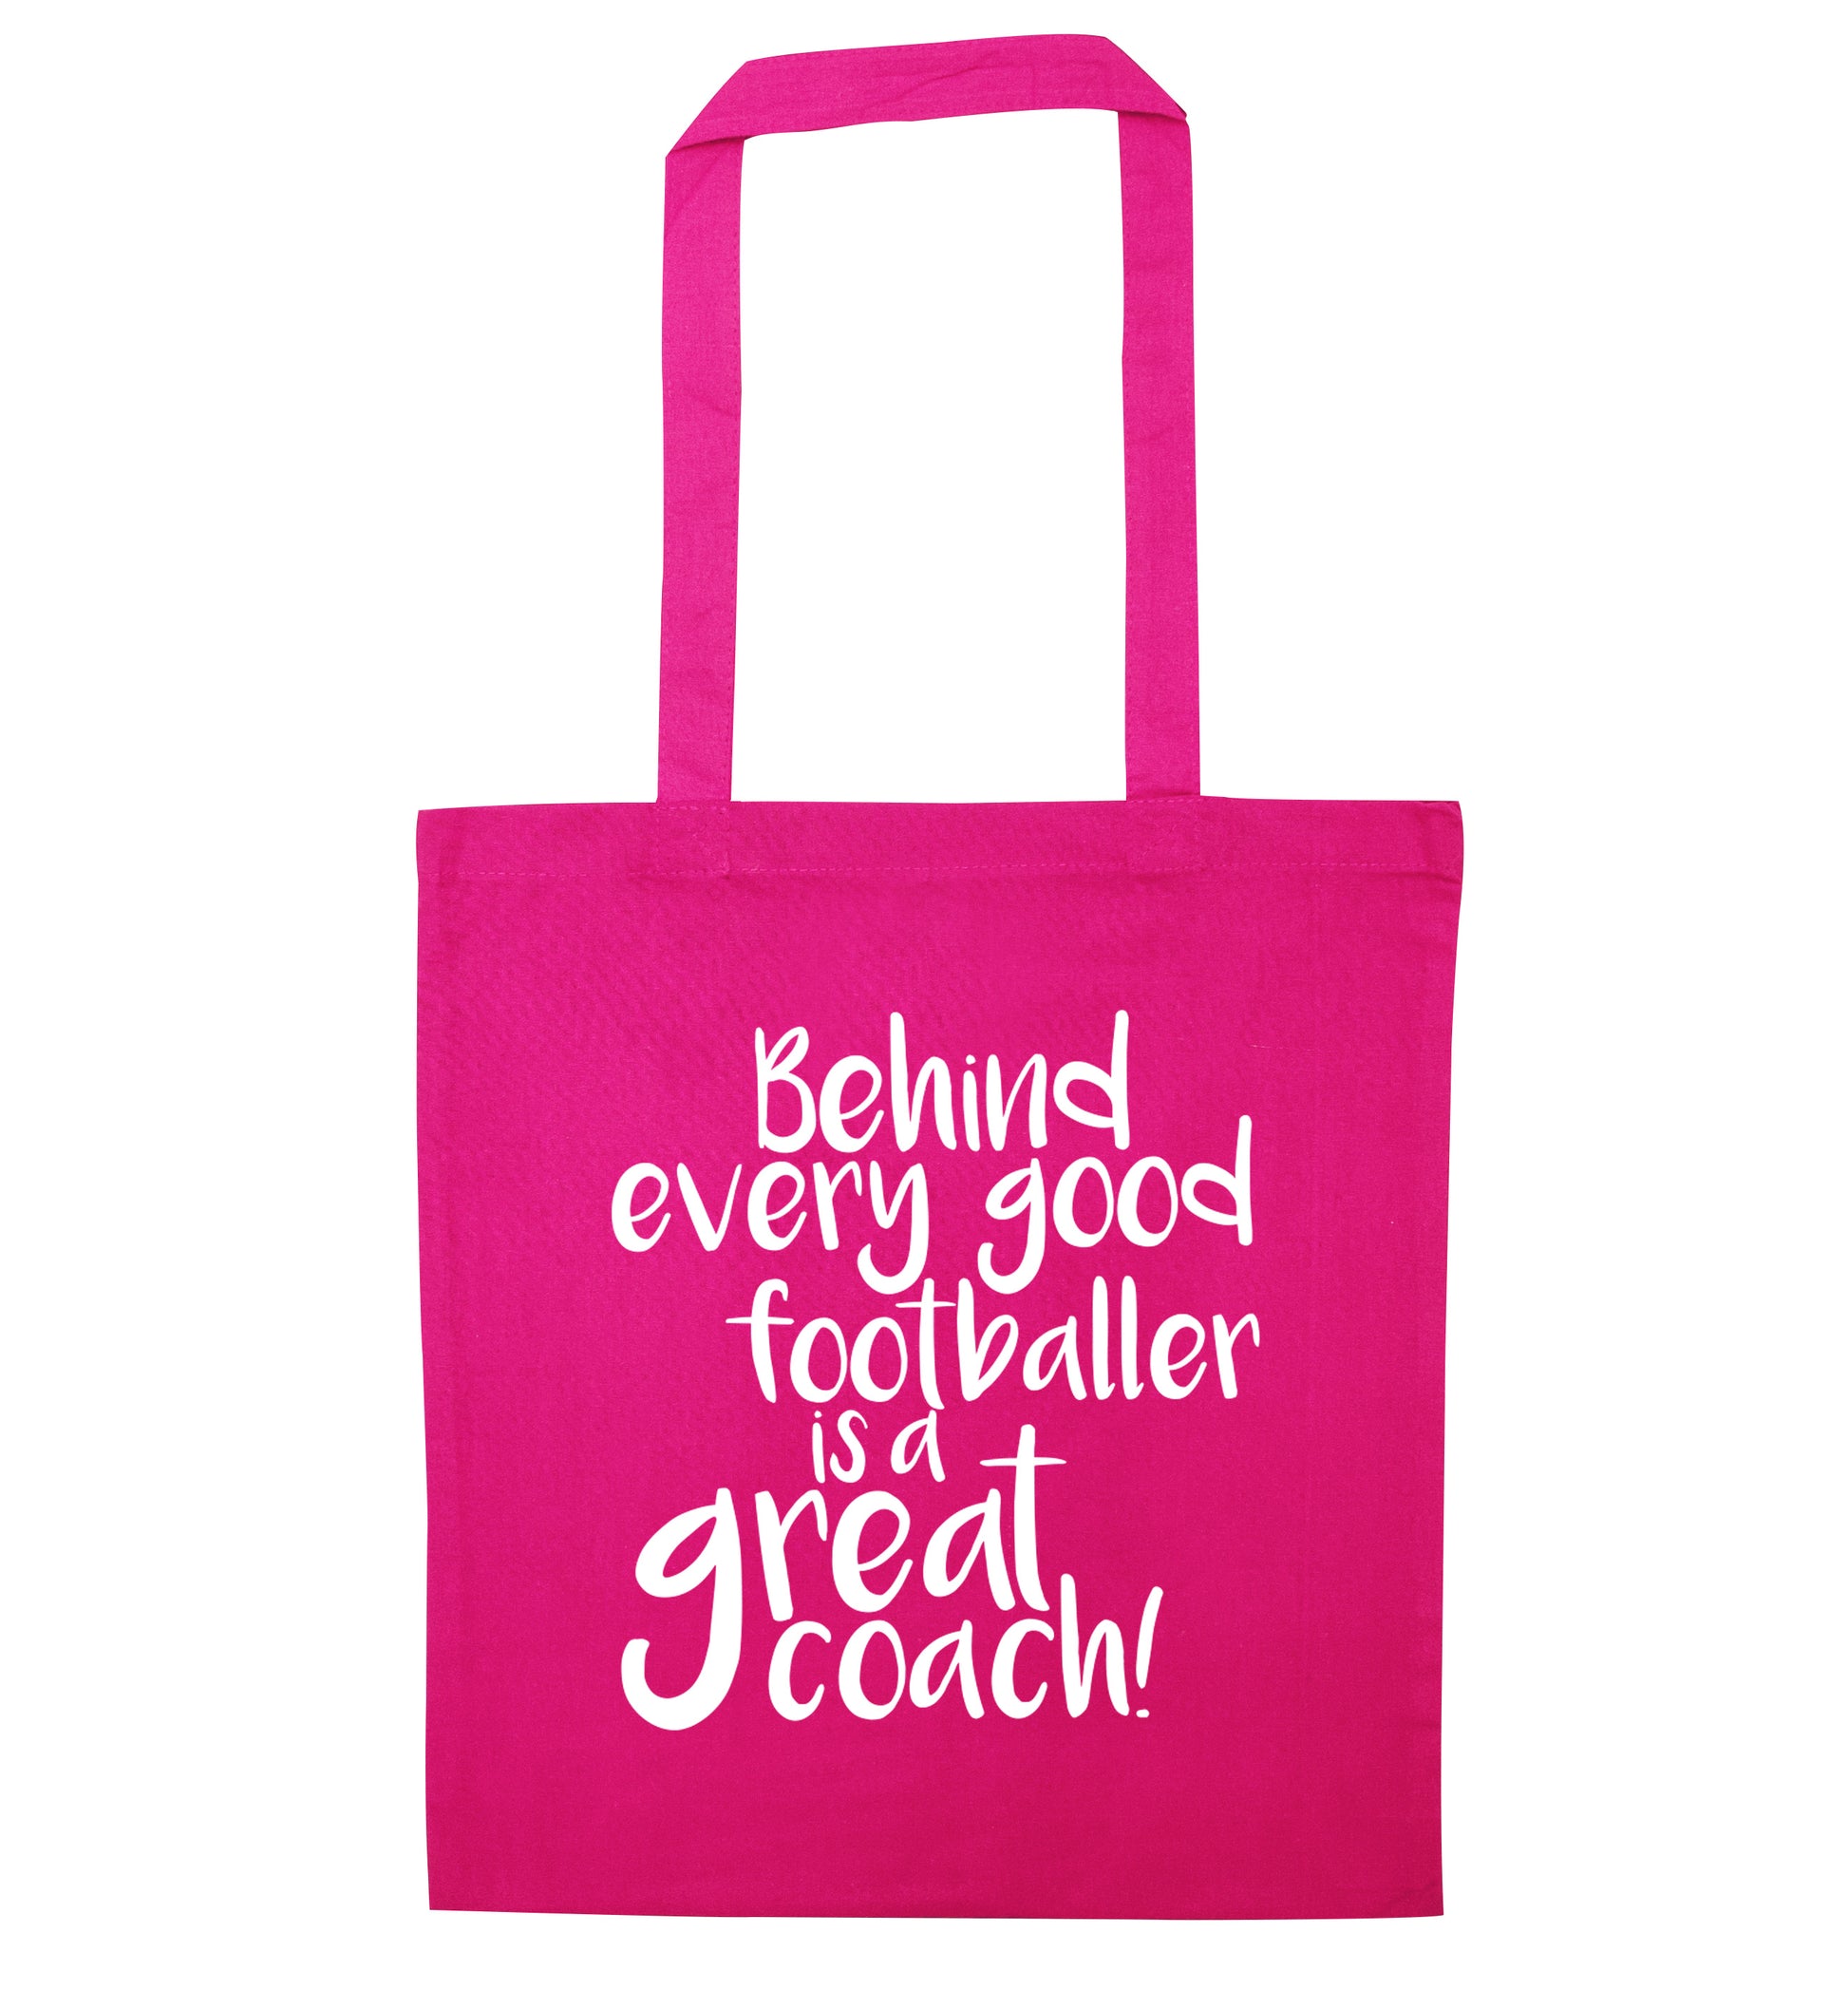 Behind every good footballer is a great coach! pink tote bag